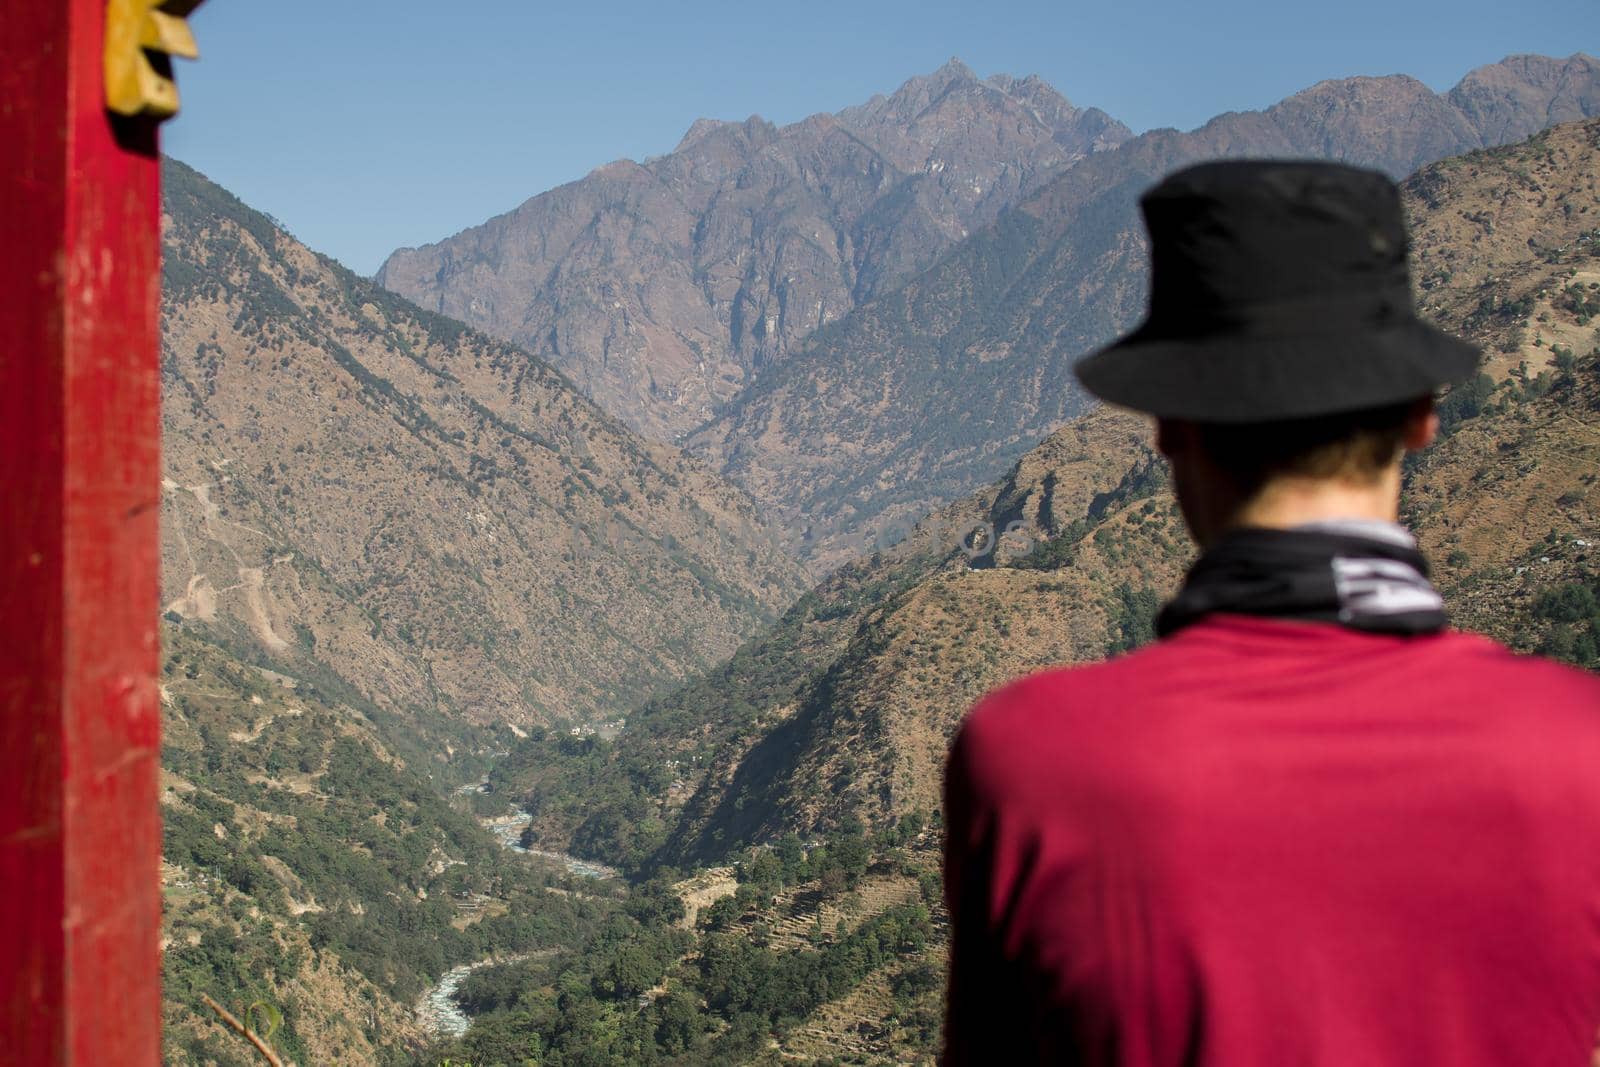 Man hiking Annapurna circuit in Nepal by arvidnorberg